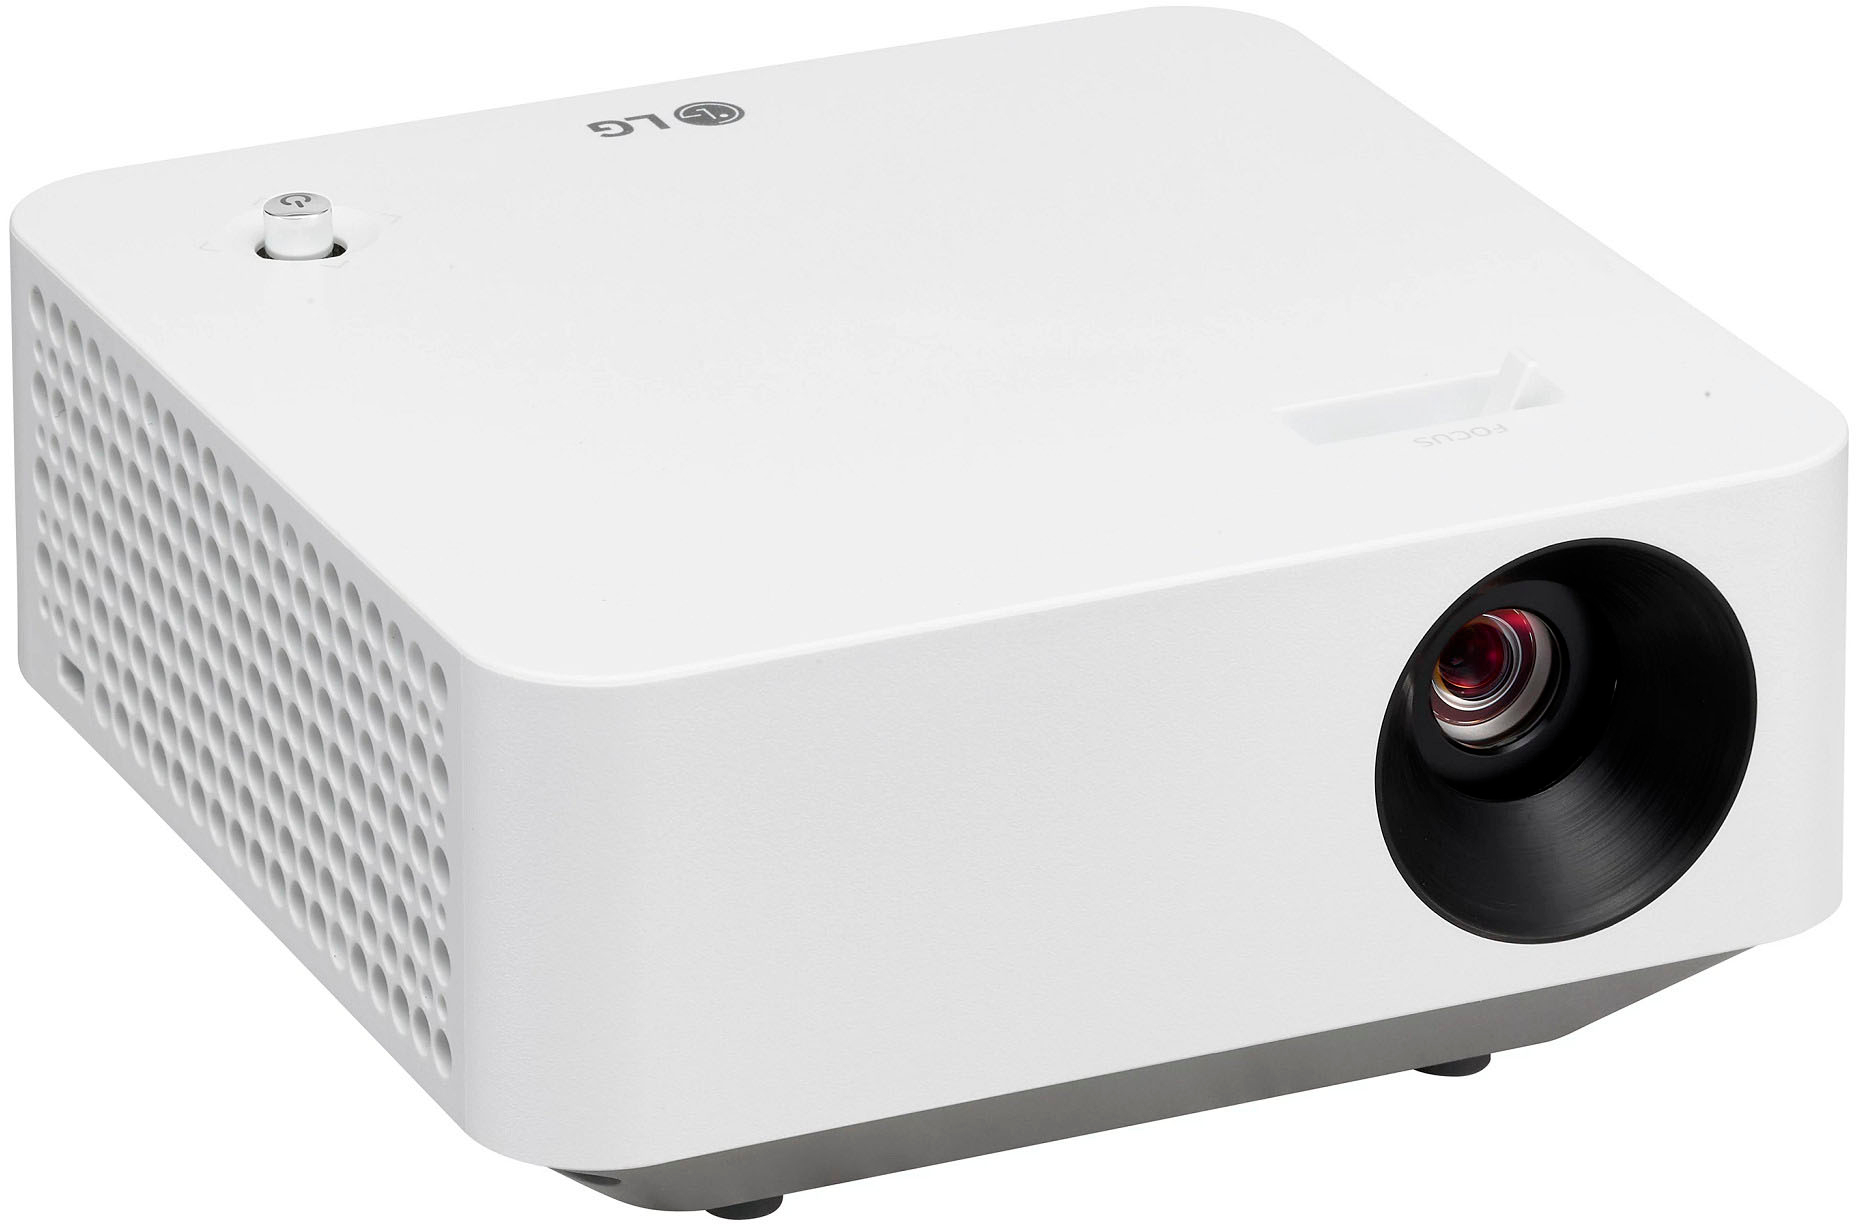 Angle View: LG - CineBeam PF510Q Full HD 1080p Wireless Smart DLP Portable Projector with High Dynamic Range - White